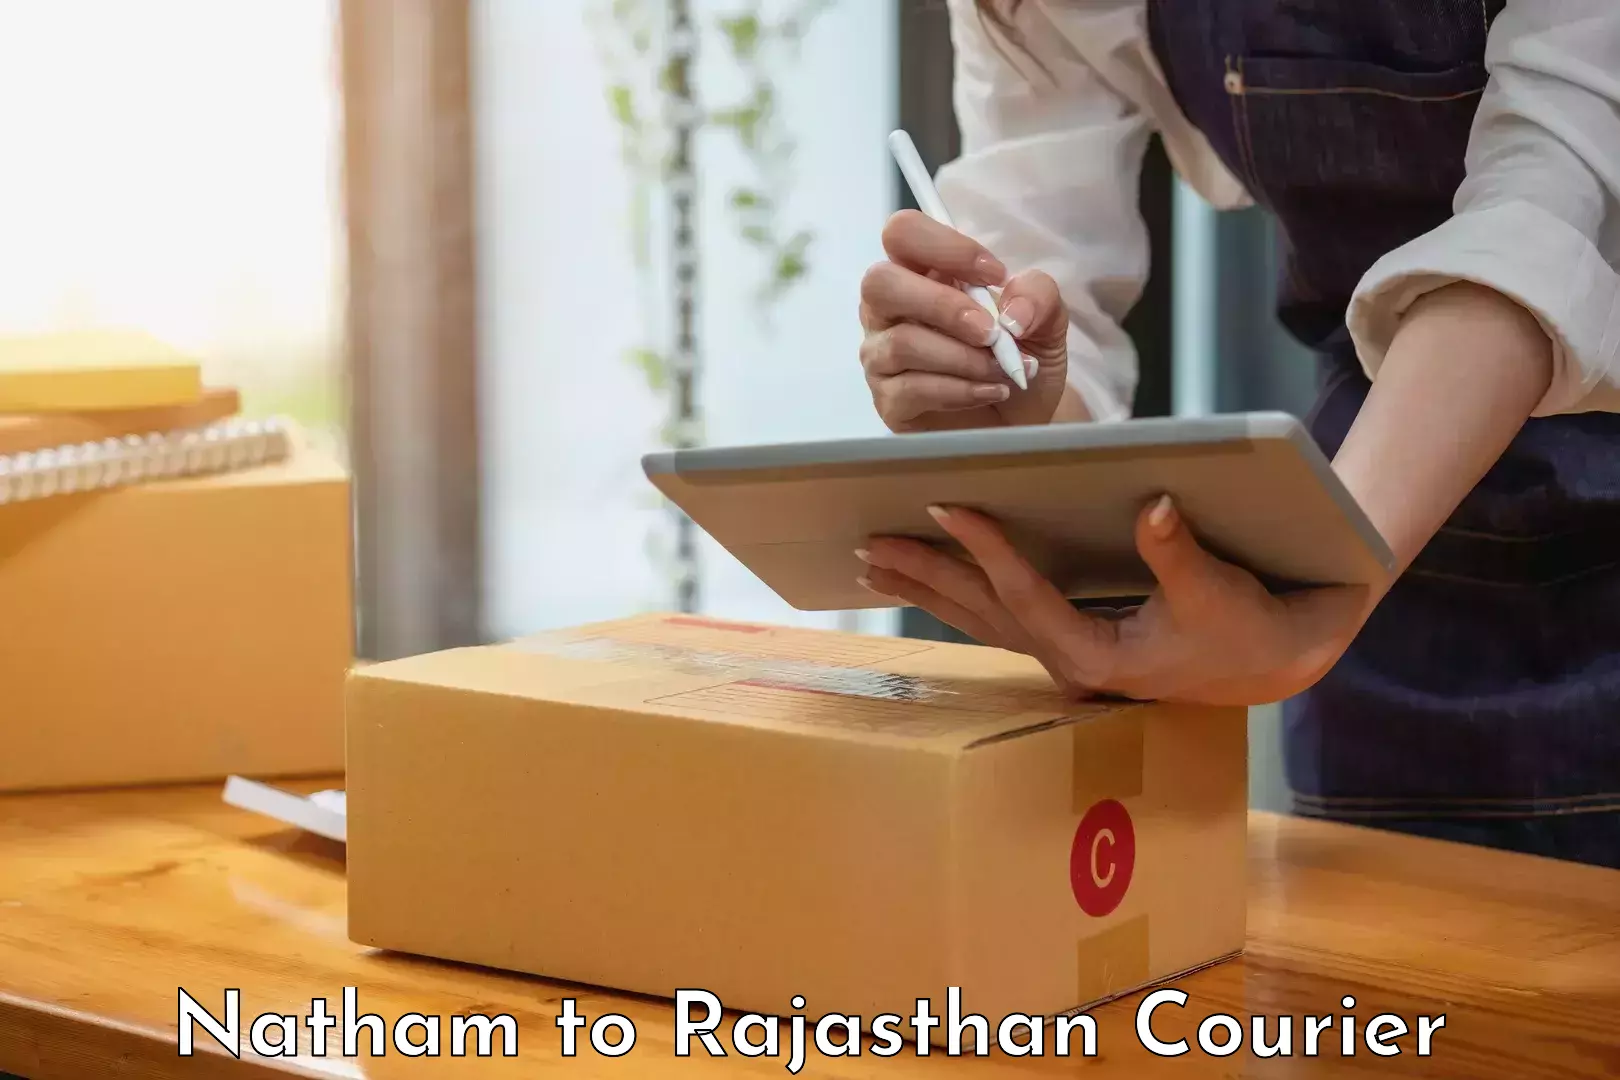 Courier service efficiency Natham to Rajasthan